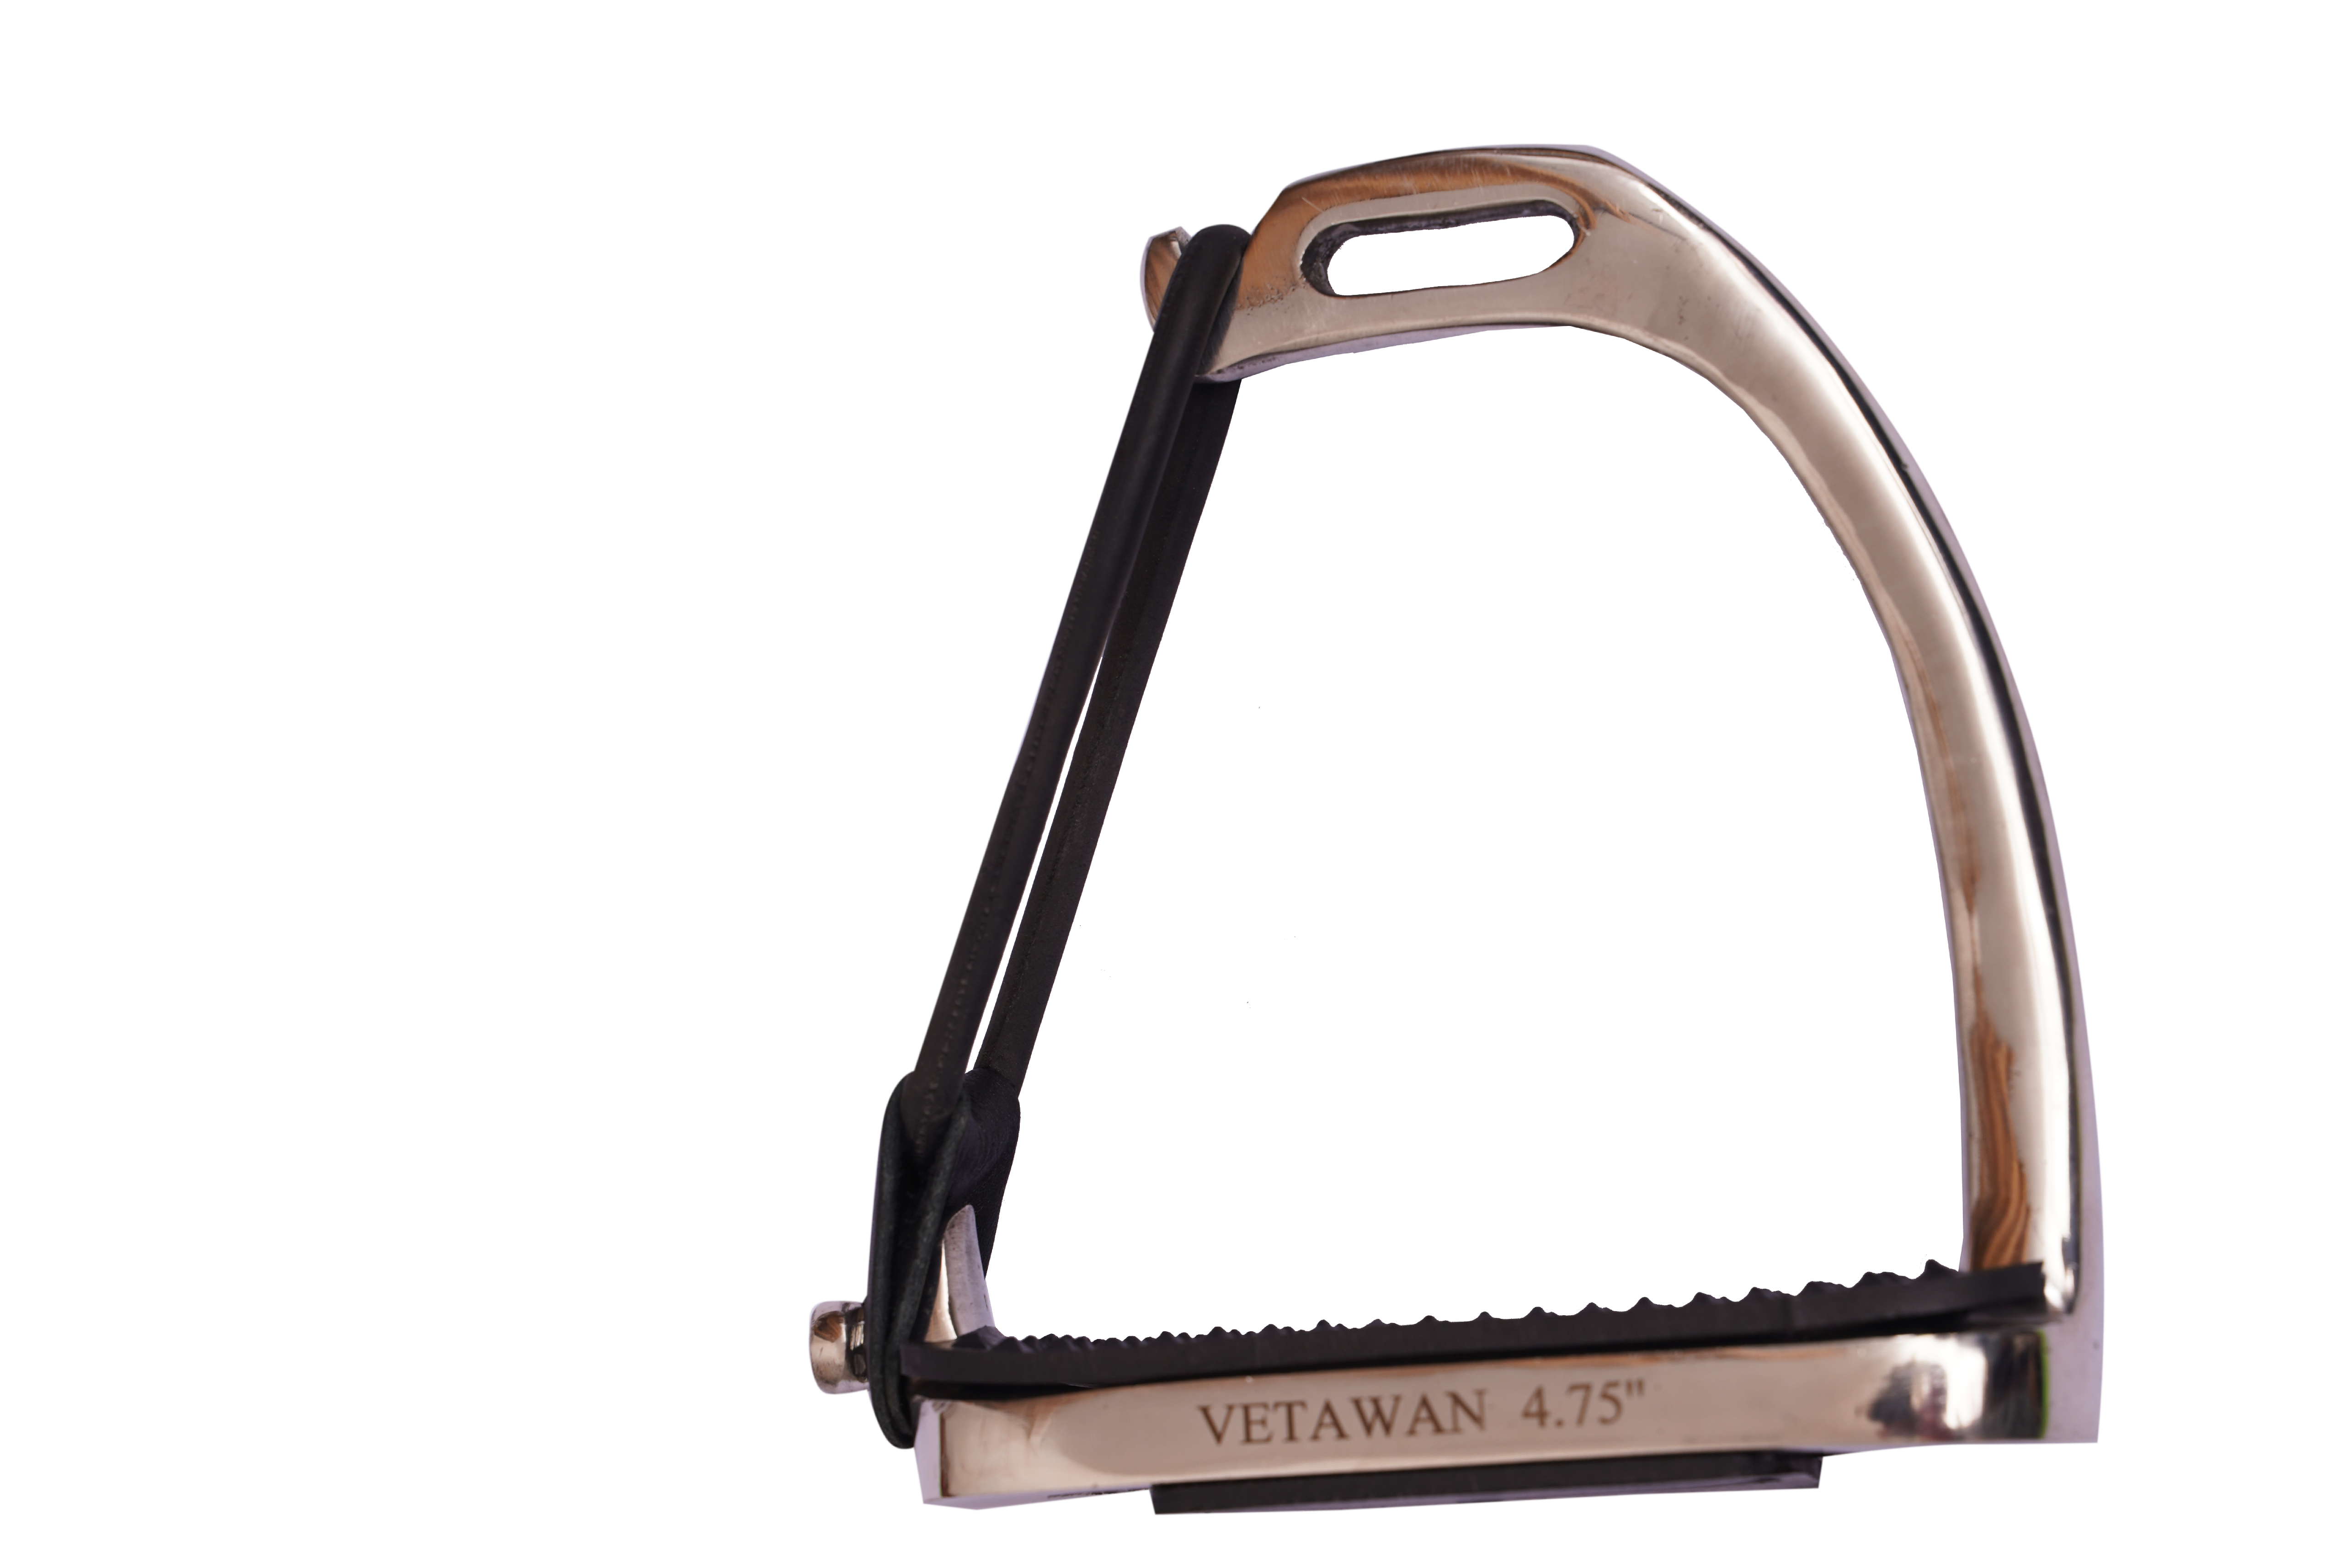 Flexi bent stainless steel stirrup with security rubber